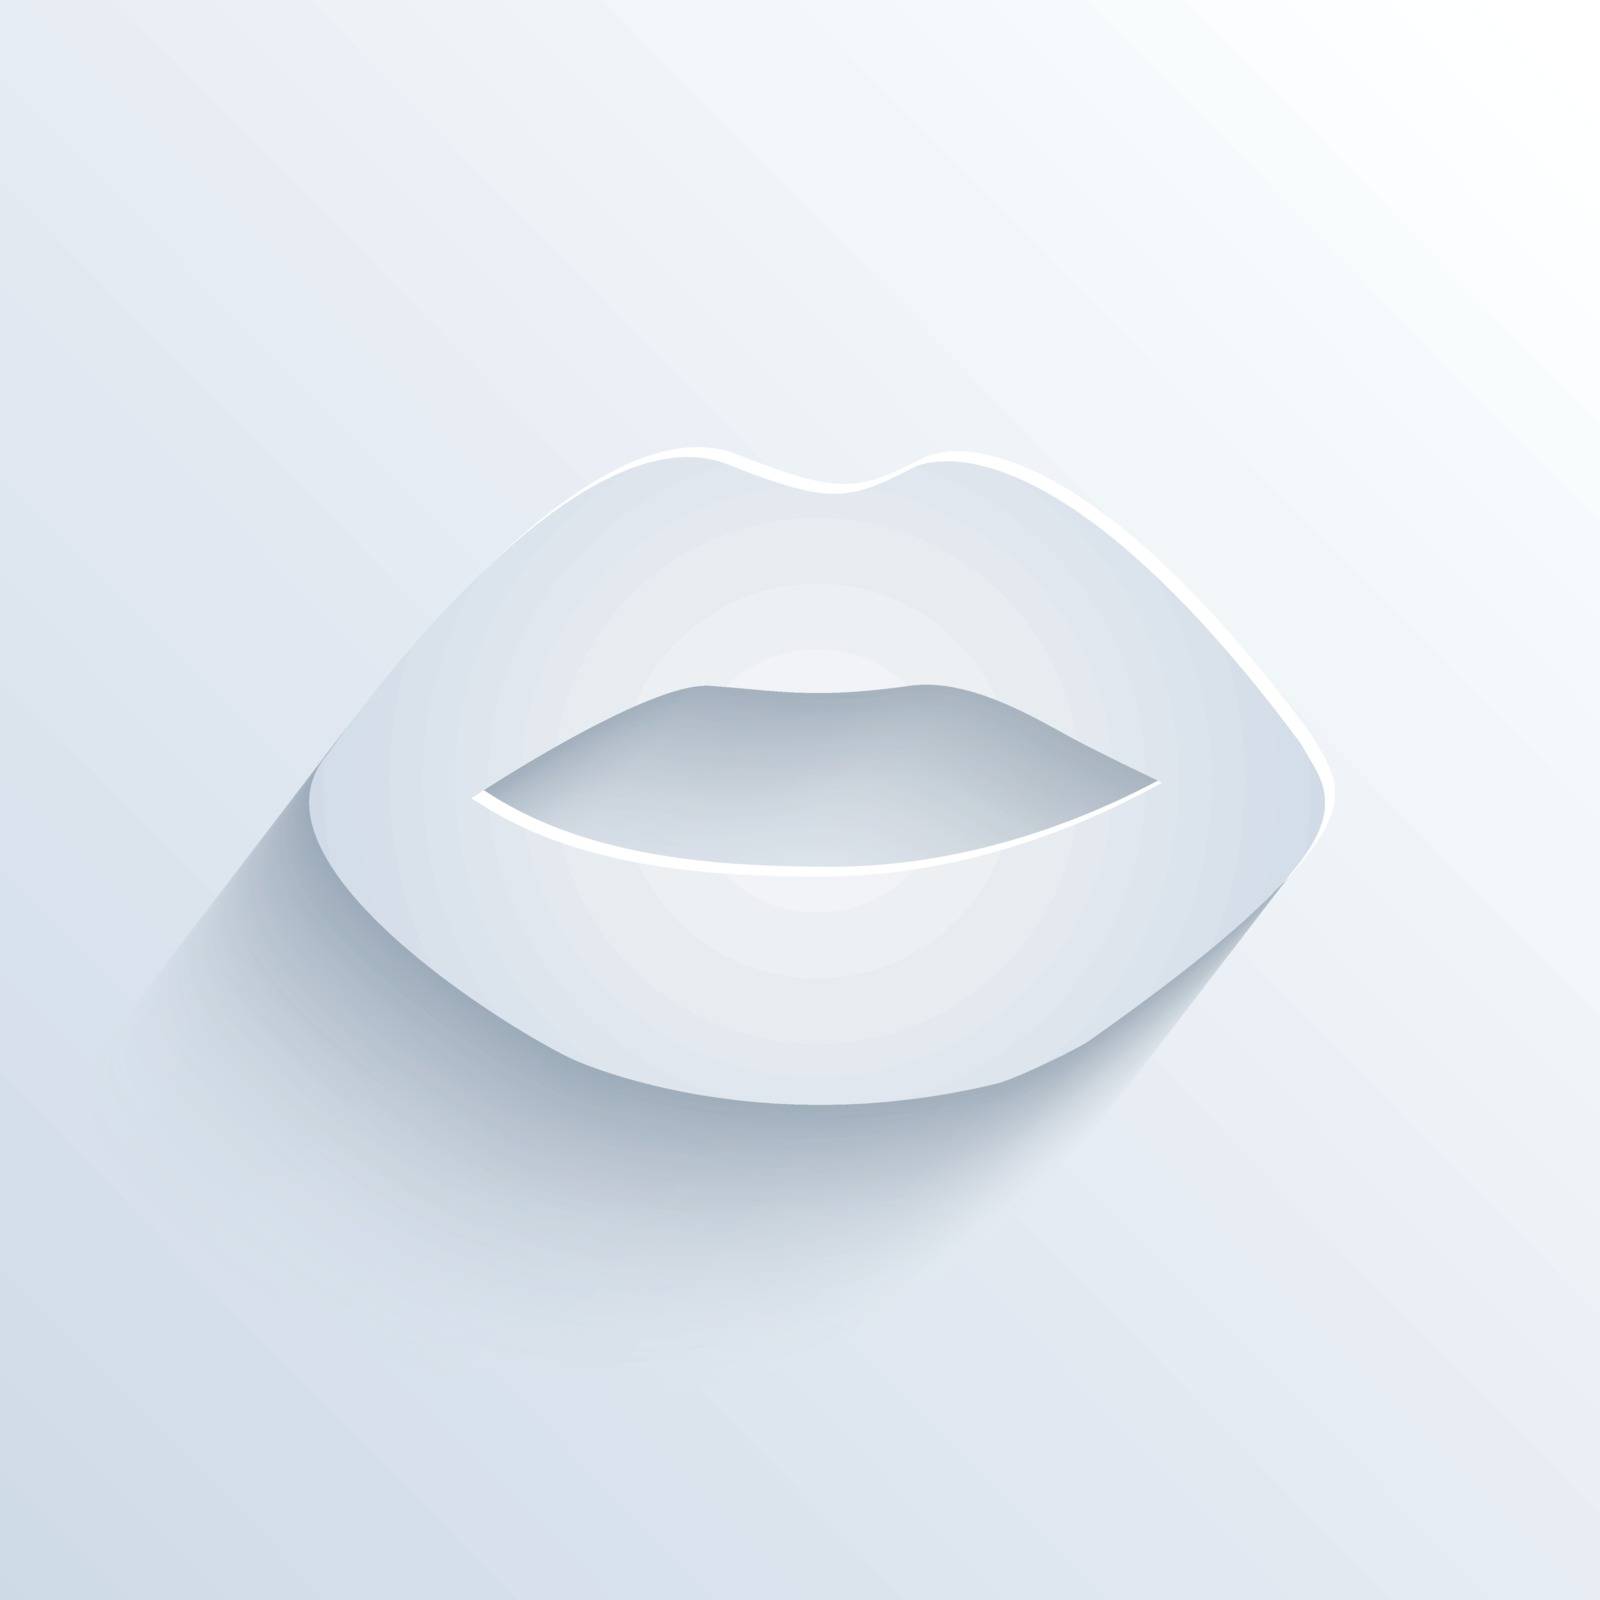 Vector illustration of lips icon with shadow